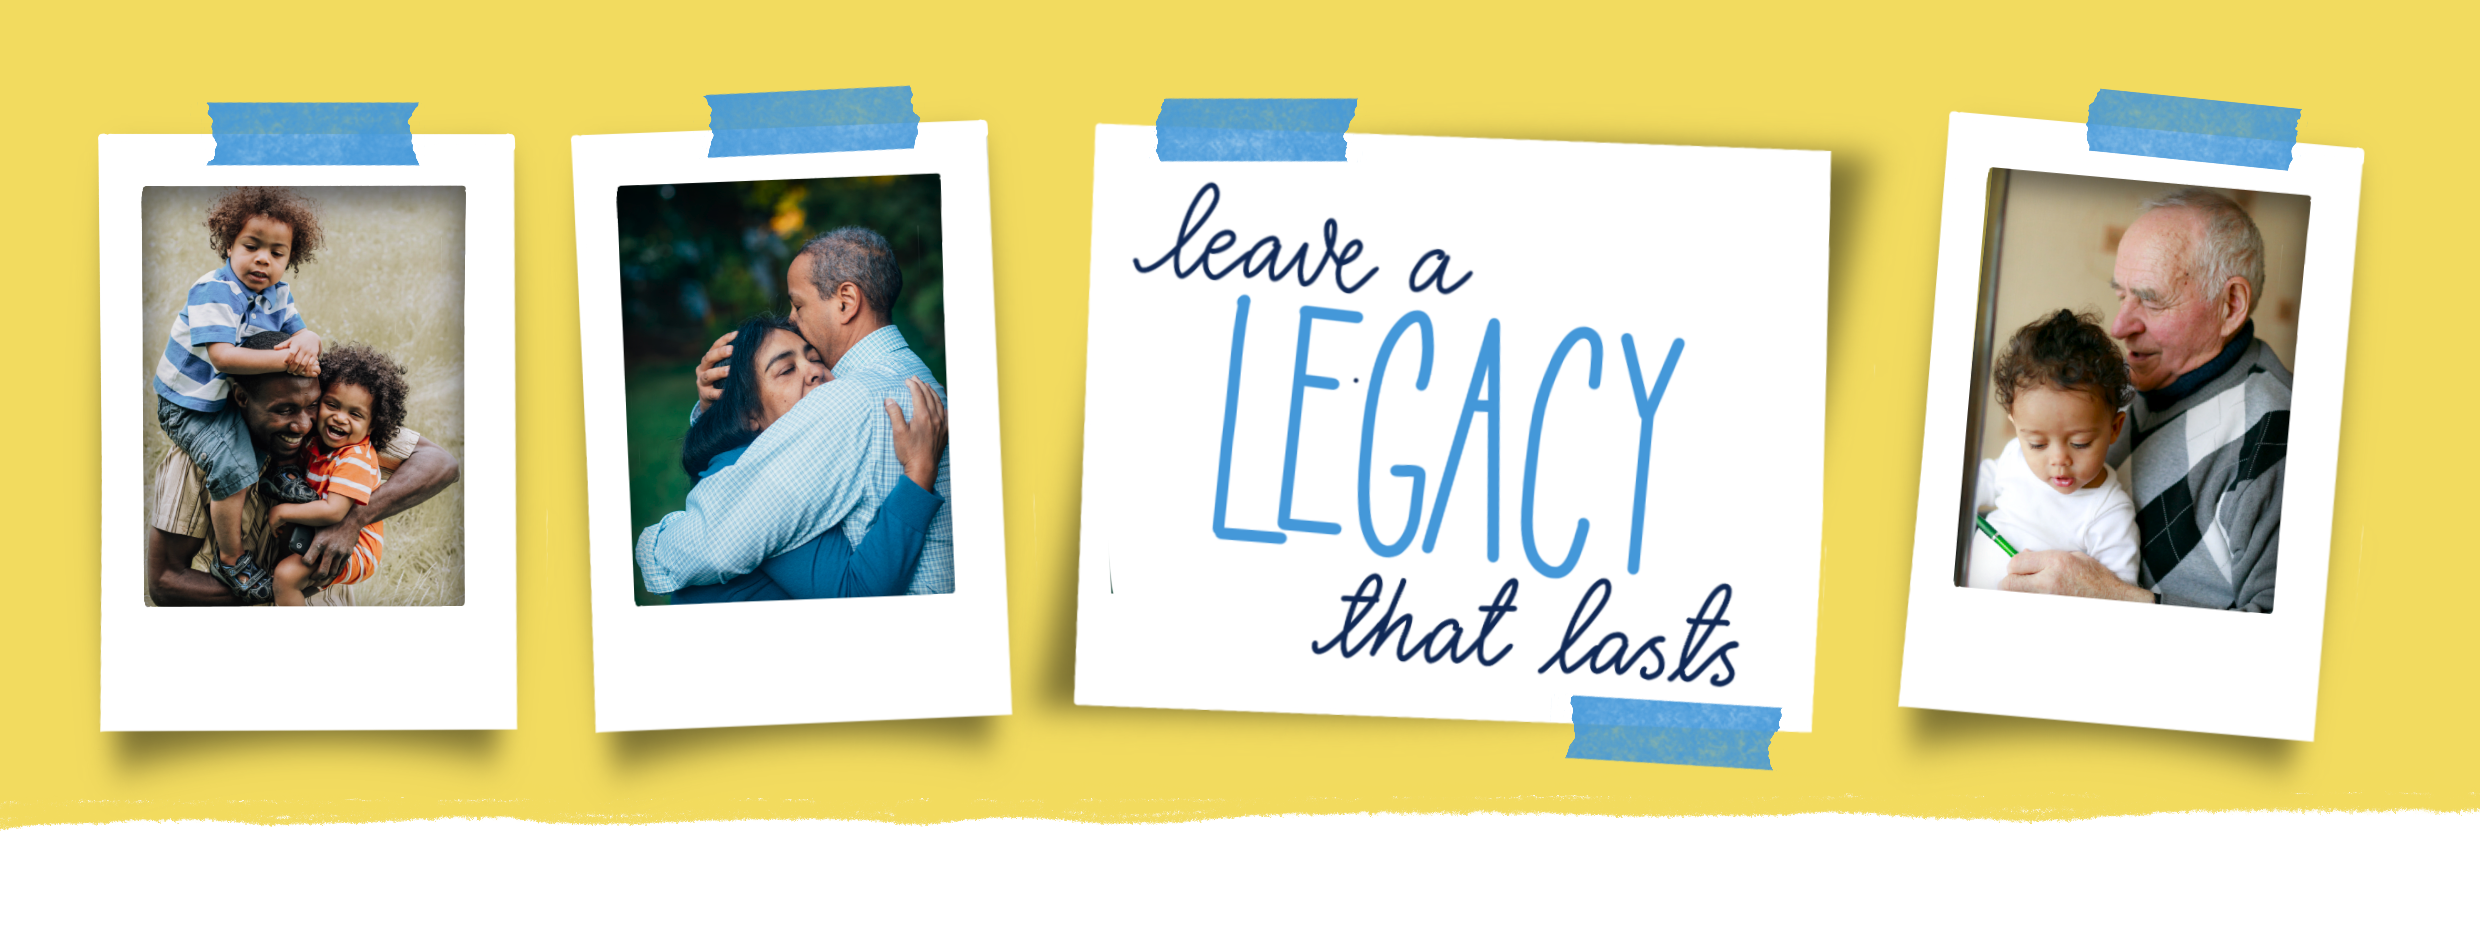 Leave a legacy that lasts